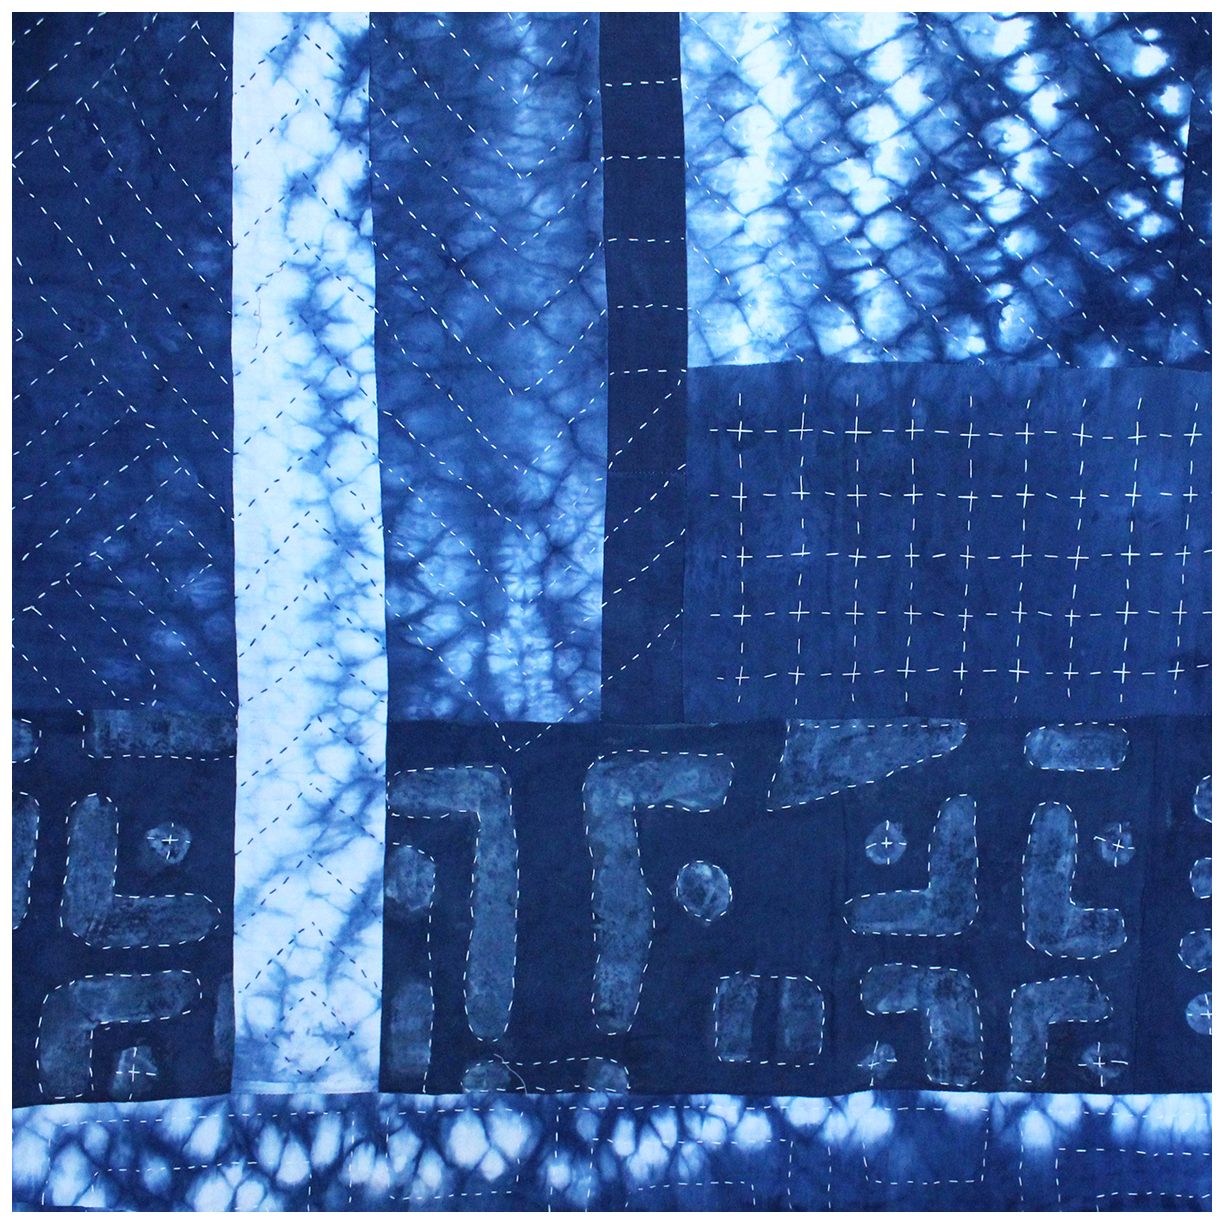 A detail view of a handmade indigo dyed patchwork quilt, showing off delicate hand stitching patterns.